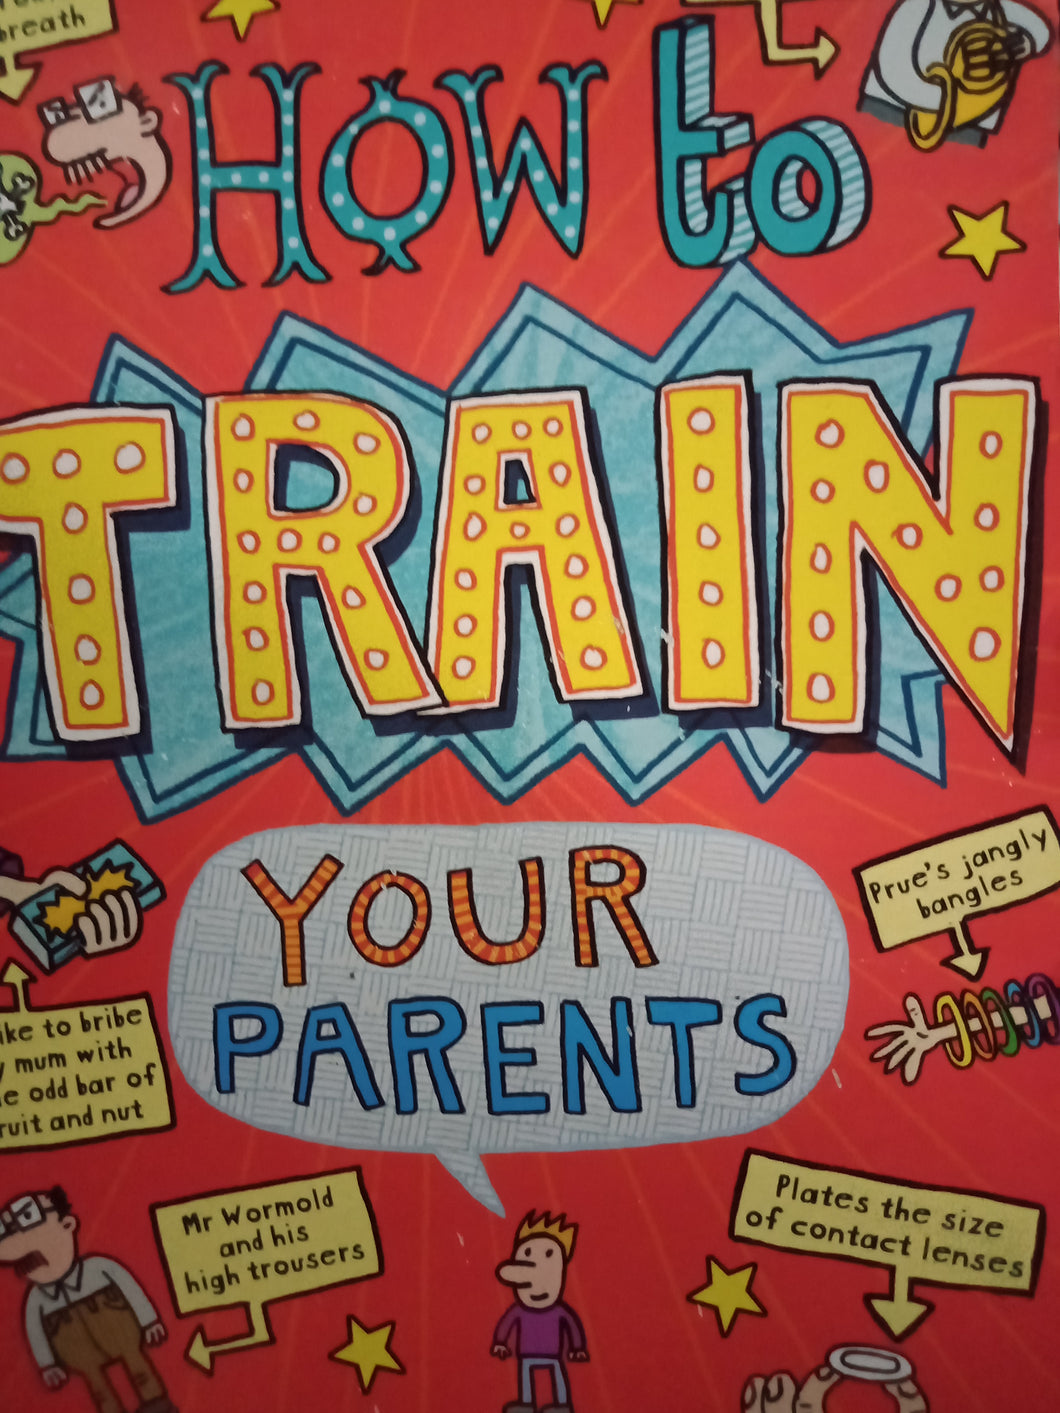 How To Train Your Parents by Pete Johnson